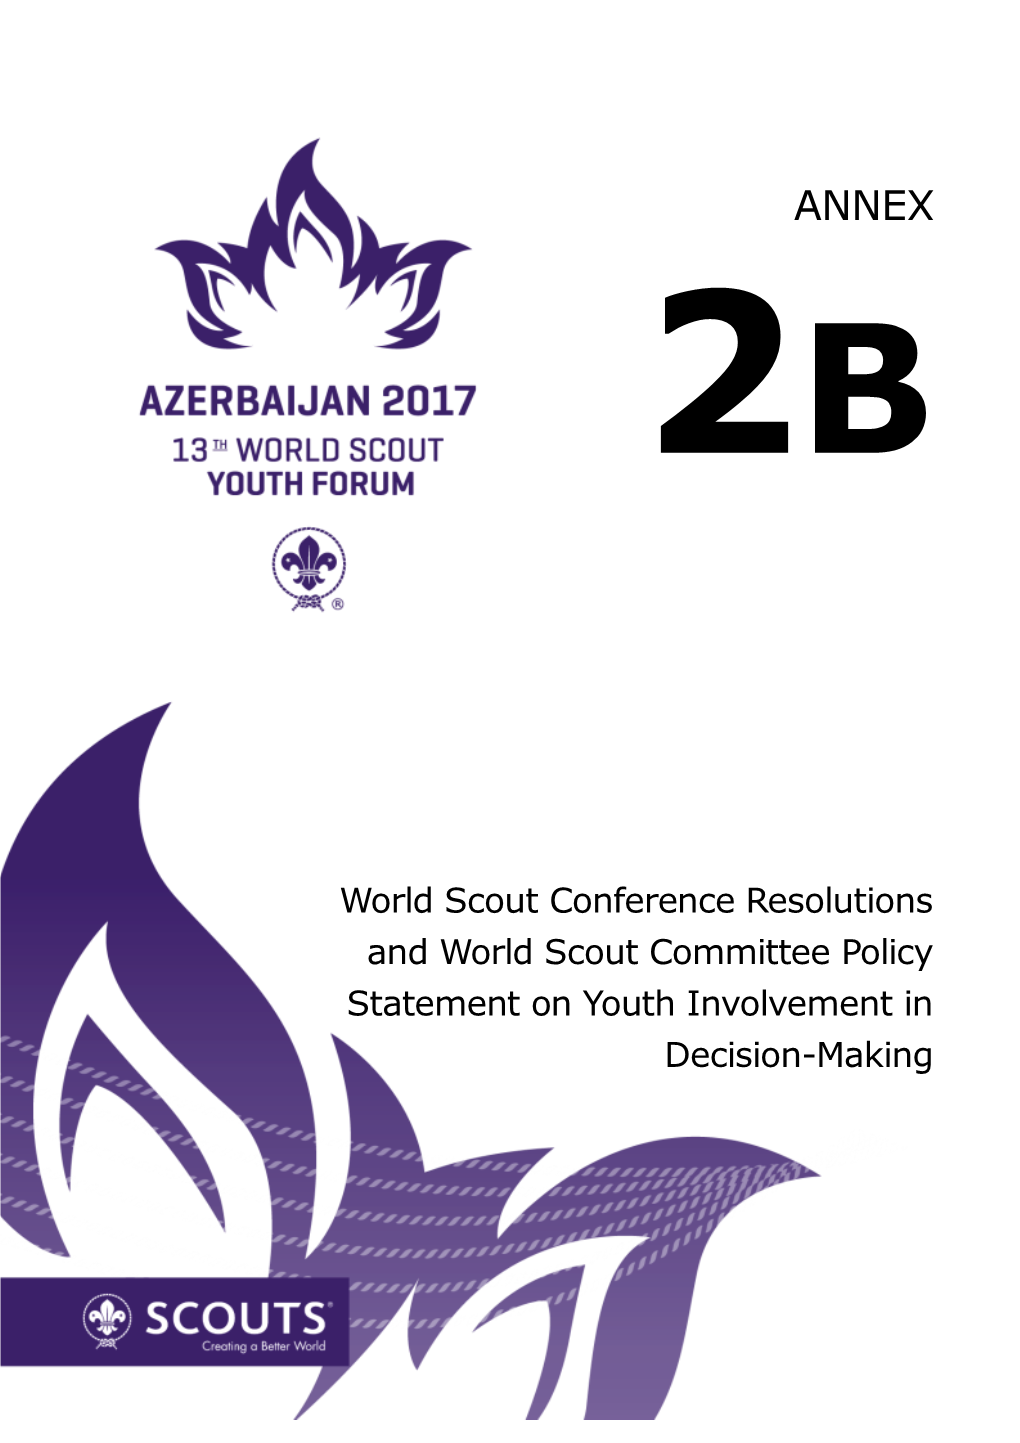 World Scout Conference Resolutions and World Scout Committee Policy Statement on Youth Involvement in Decision-Making